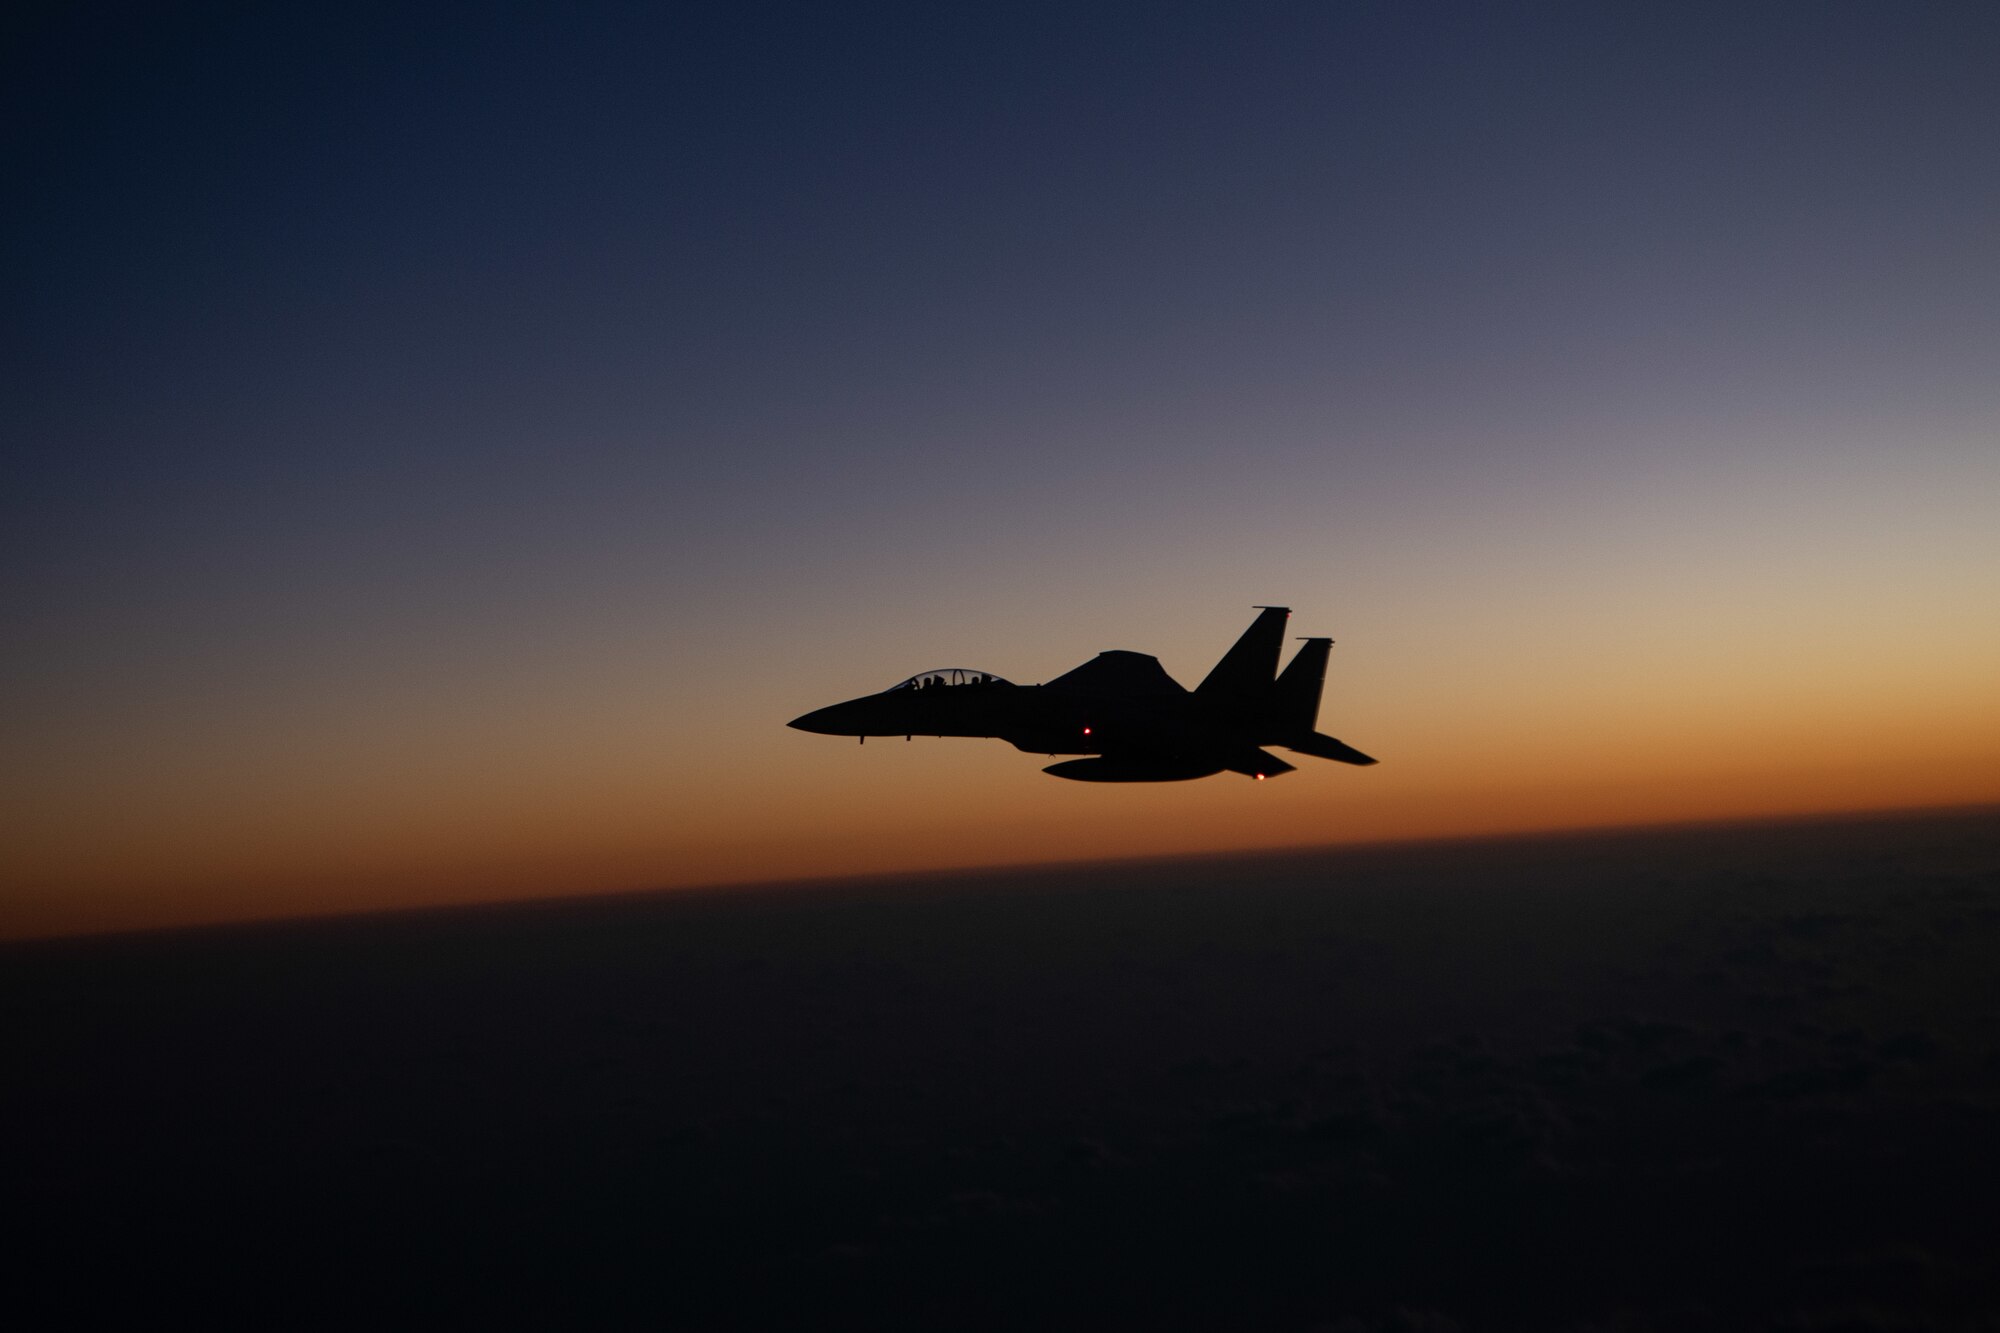 A Japan Air Self-Defense Force F-15DJ Eagle flies over the Pacific Ocean after refueling during Exercise Southern Beach, Oct. 28, 2021. Bilateral training exercises like Southern Beach help build trusting relationships among foreign and domestic forces, ensuring allies are able to come together to effectively respond to demanding scenarios and execute high-end missions in defense of a free and open Indo-Pacific region. (U.S. Air Force photo by Staff Sgt. Savannah L. Waters)